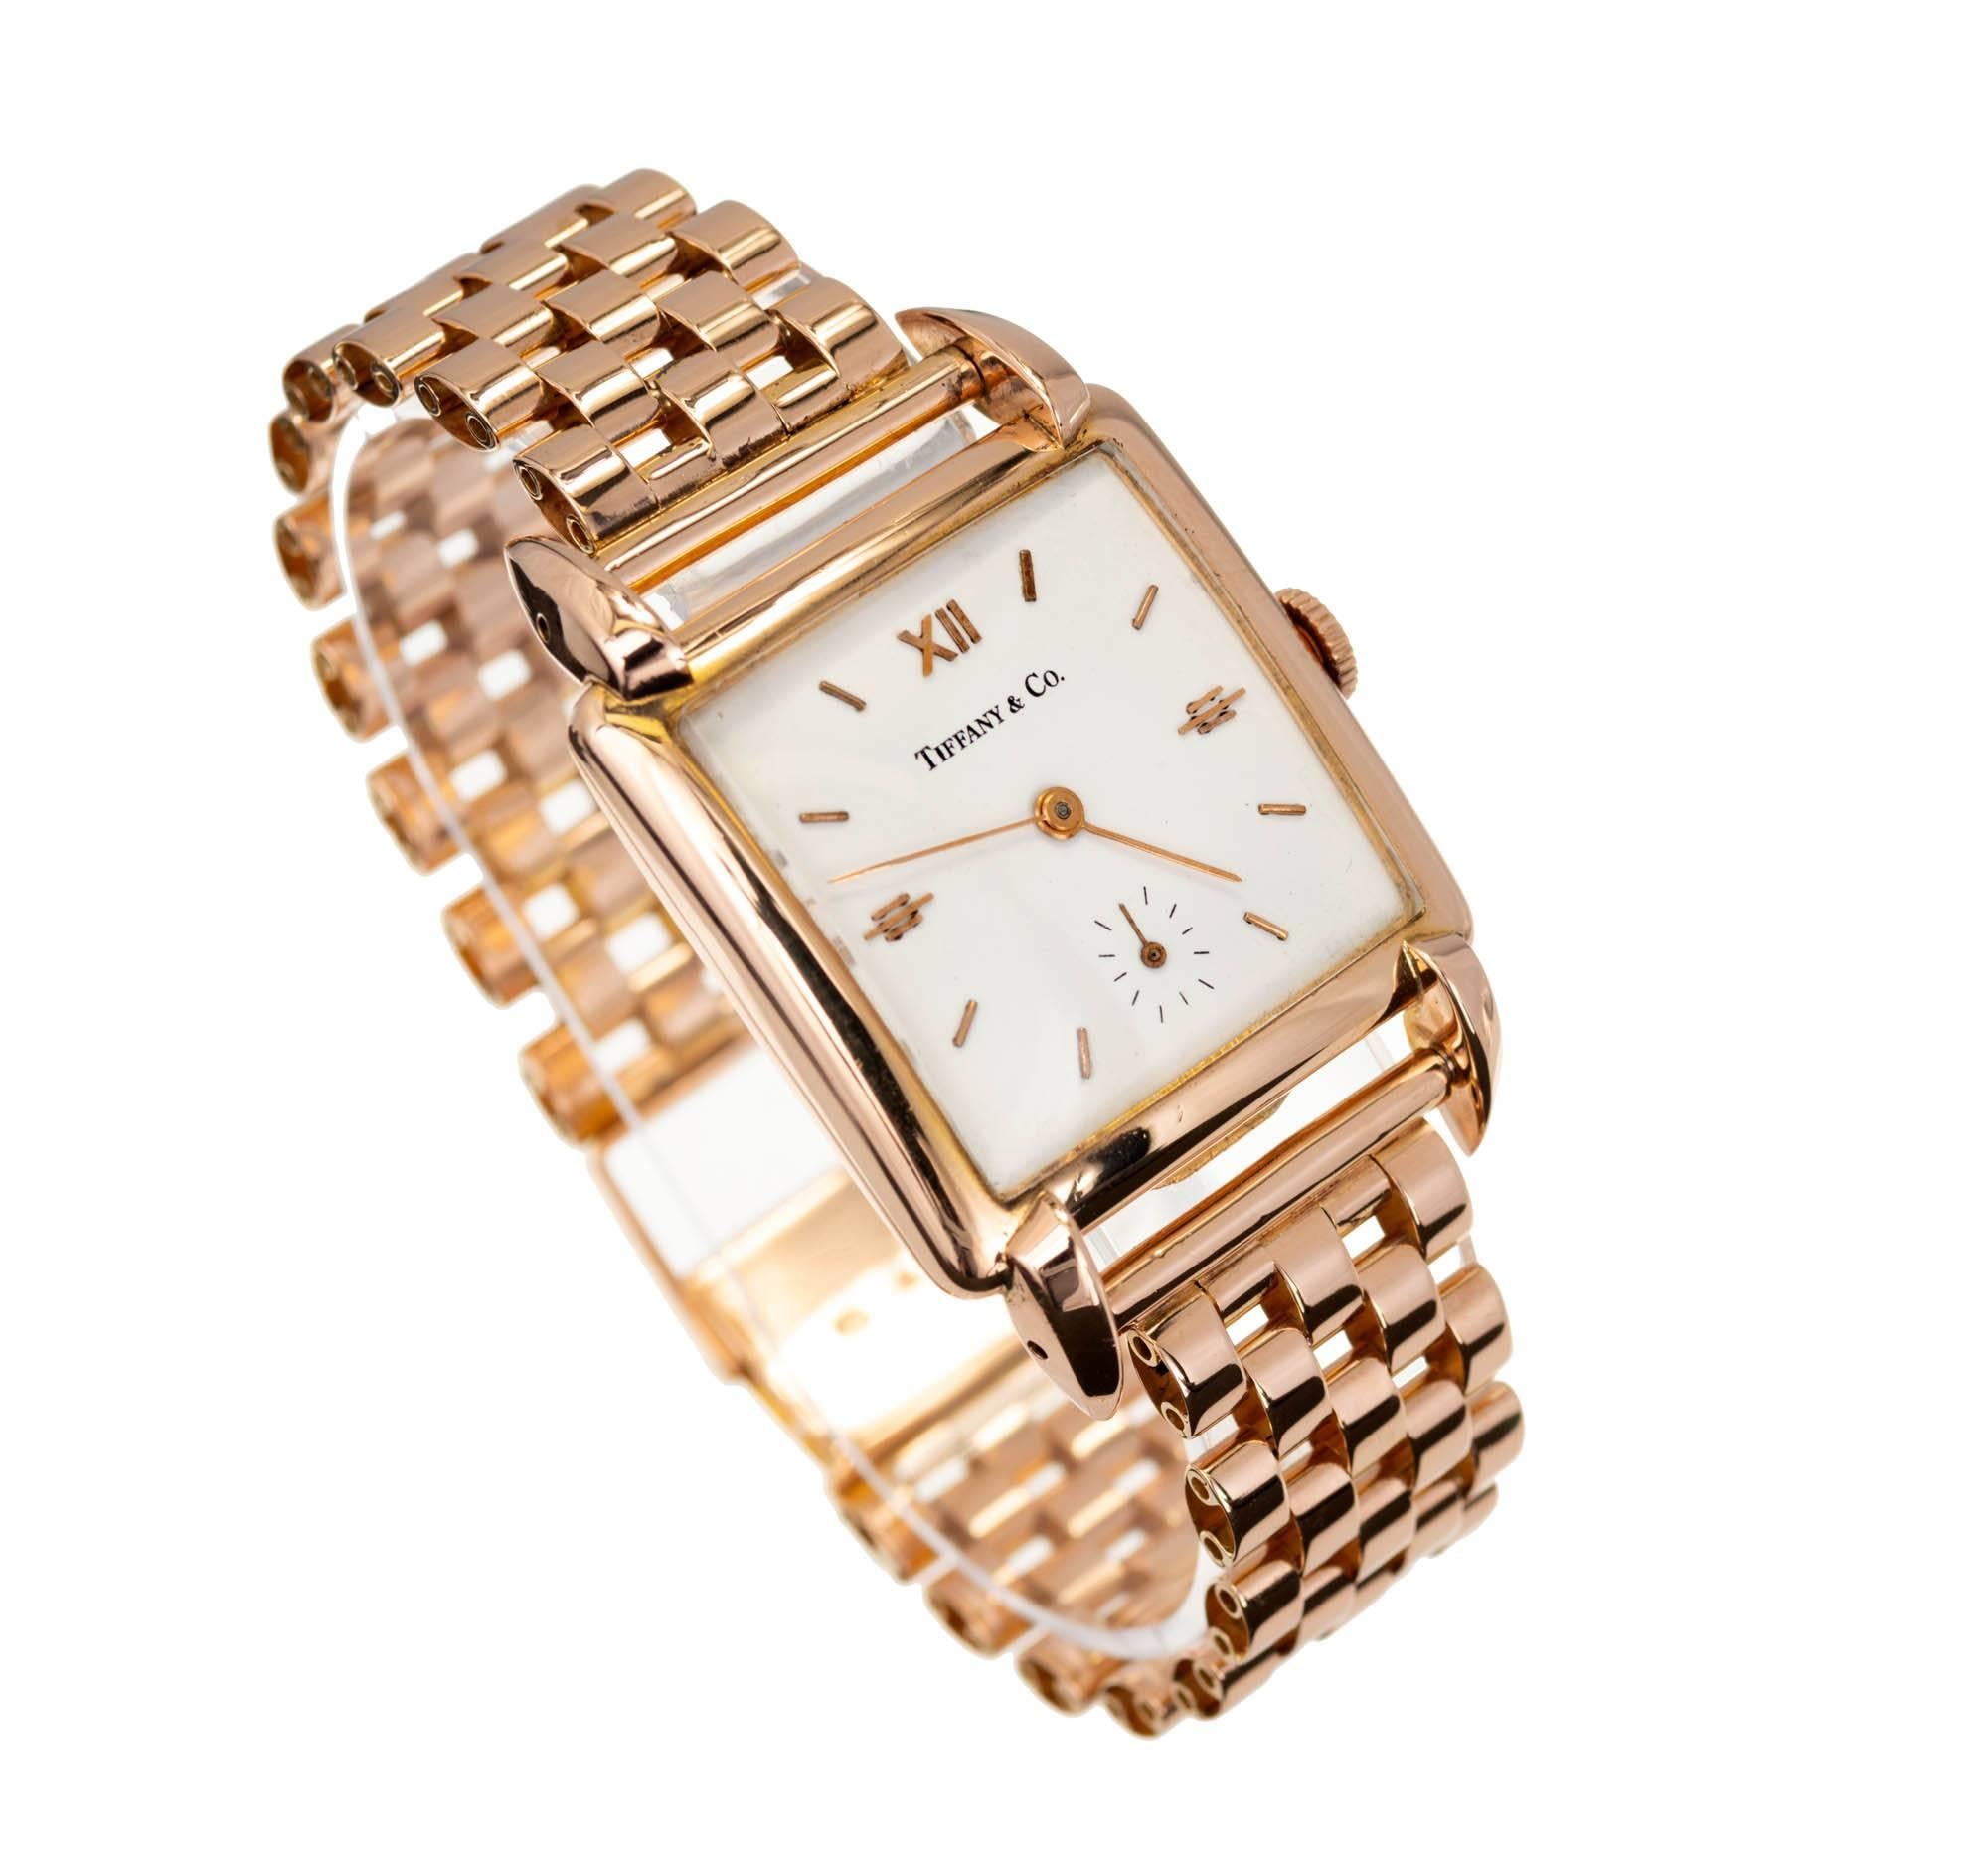 Tiffany & Co. 18k rose gold Universal Geneve wristwatch. Universal Geneve had a partnership with Tiffany during the late 1940’s and 1950’s. During this time Tiffany house brand watches were produced with Tiffany & Co on the dial and Universal cases